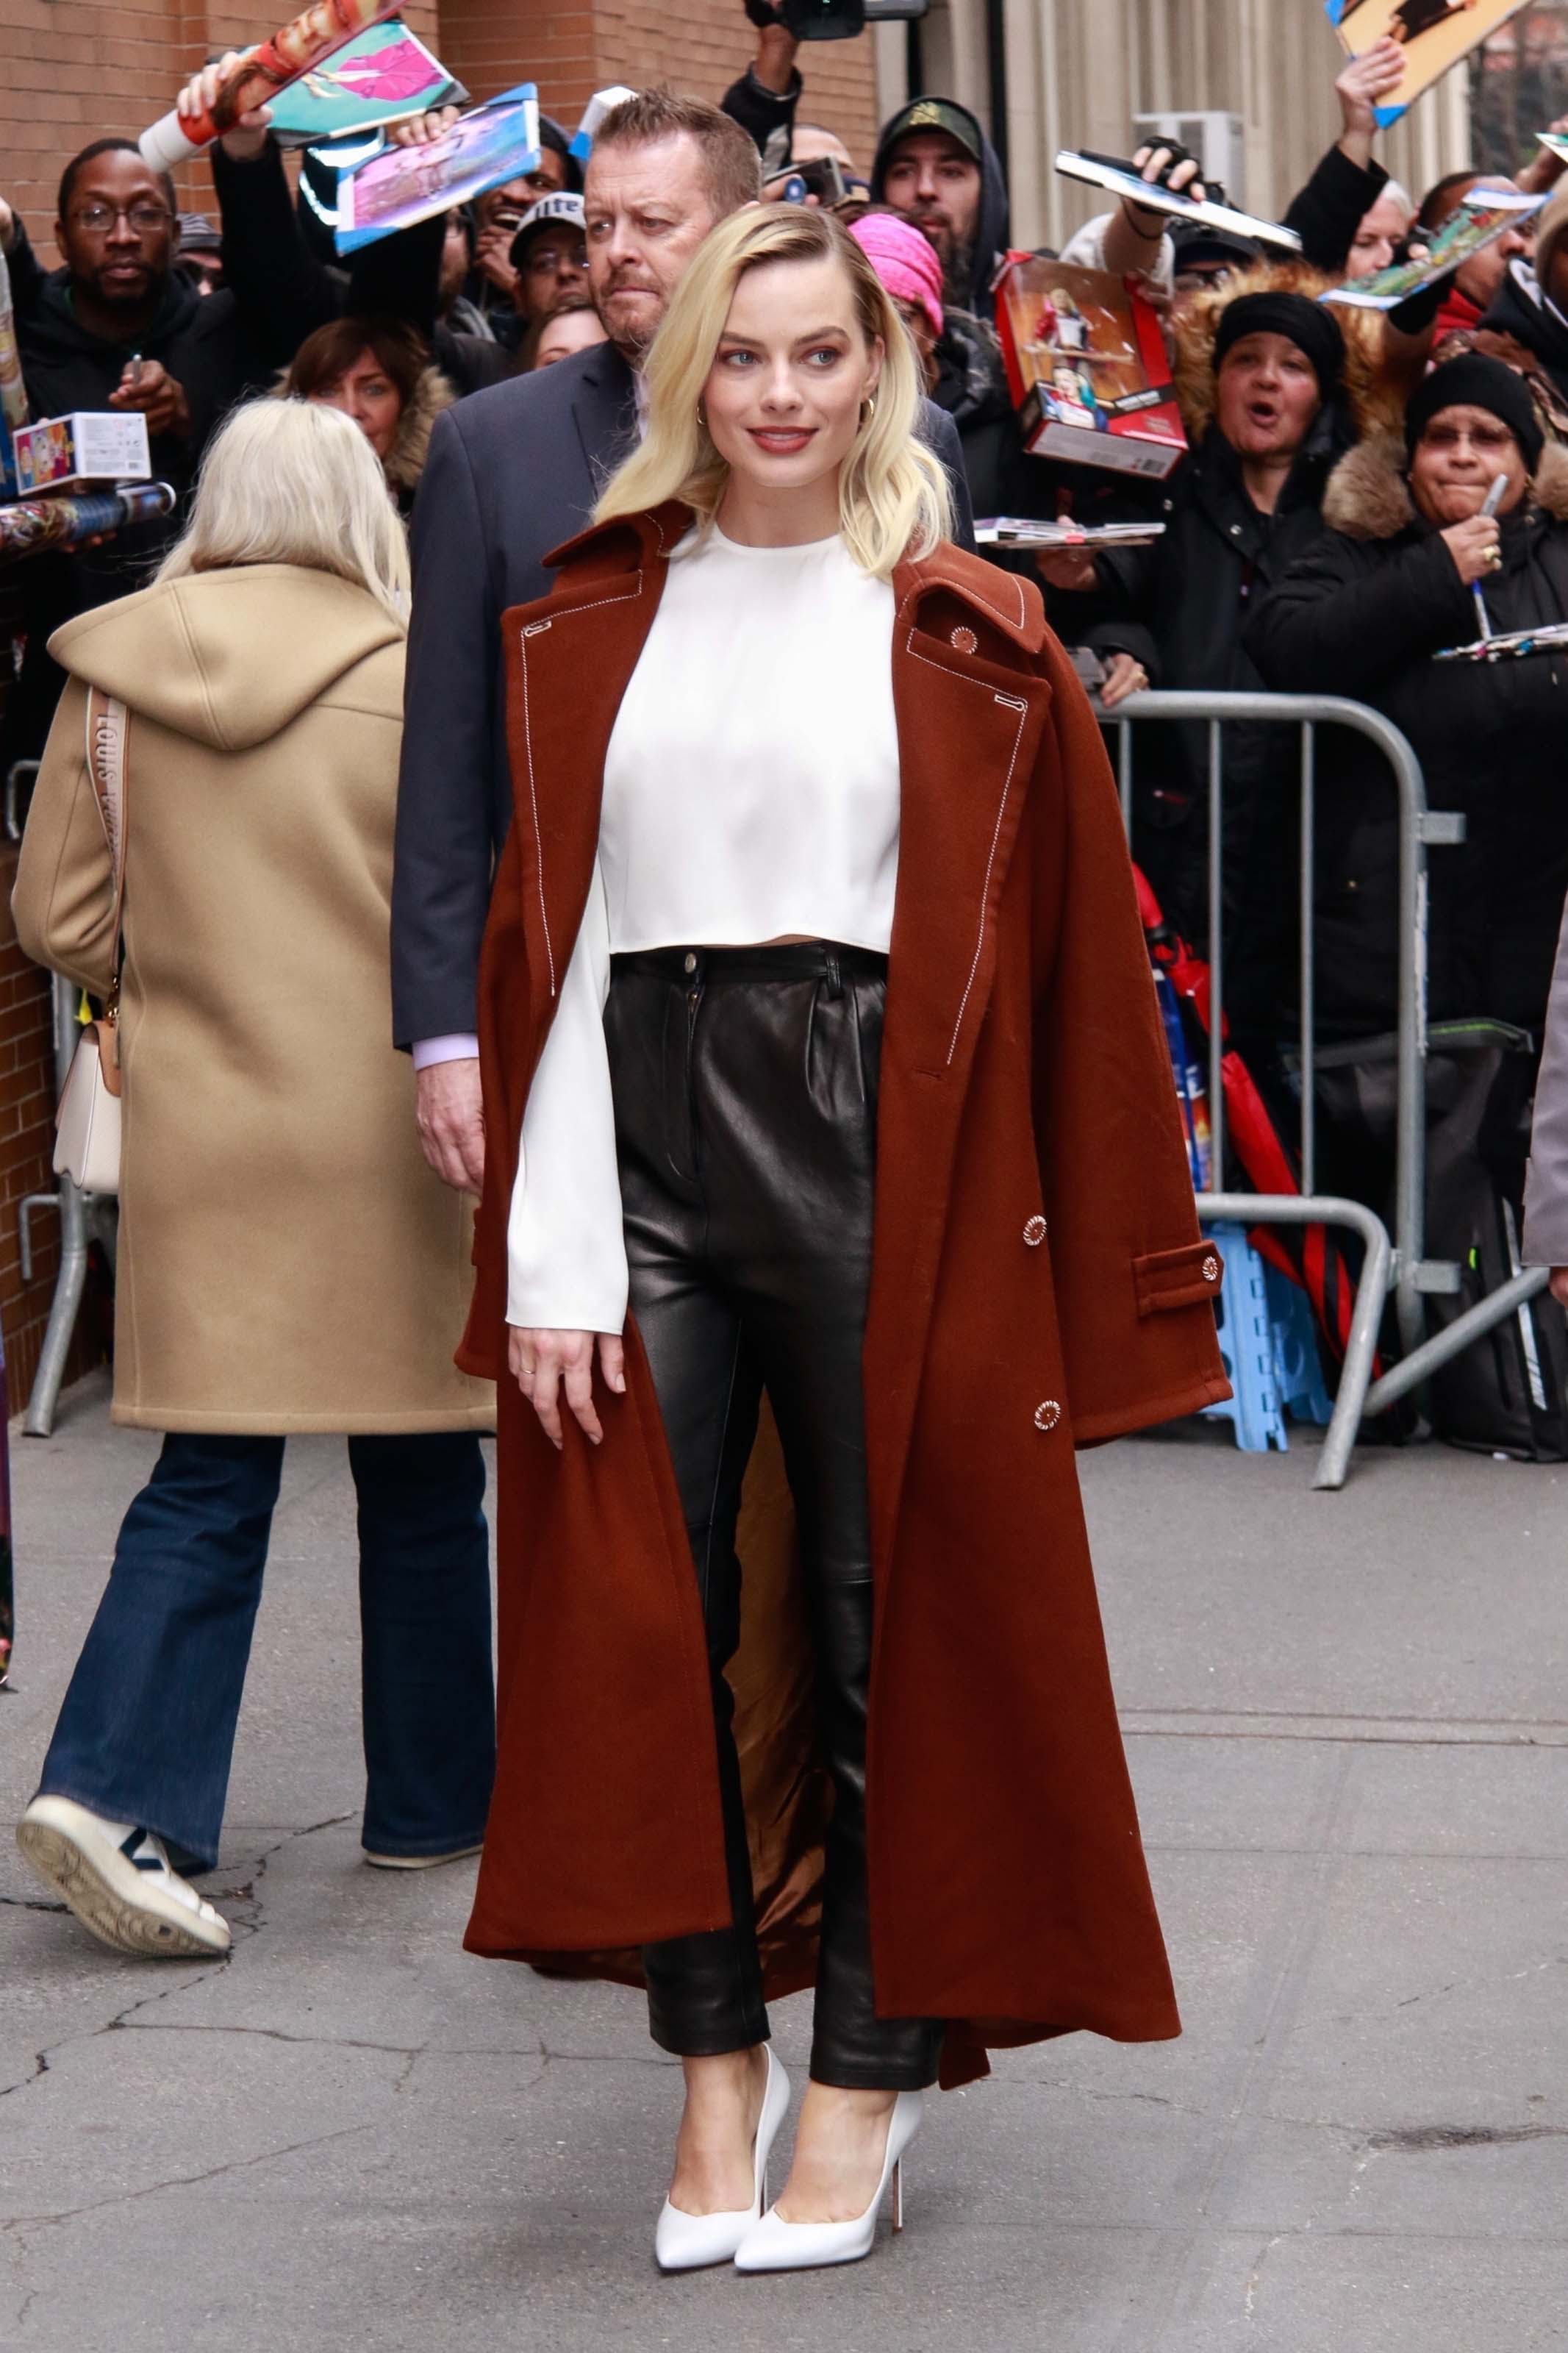 Margot Robbie doing promo in NYC